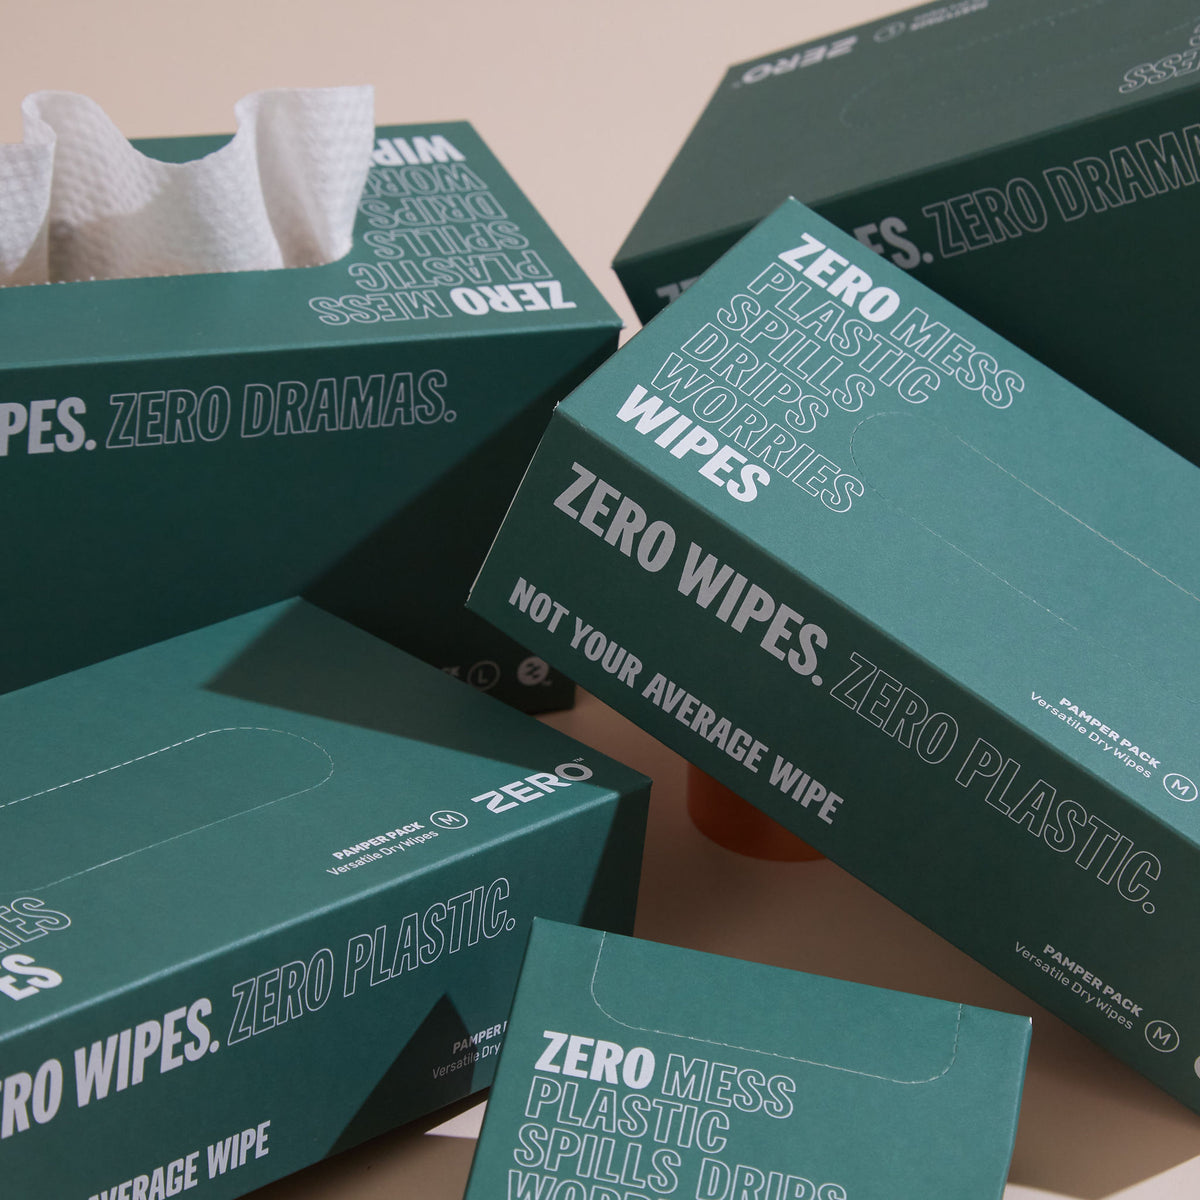 cleaning dry wipes, dry cleaning wipe, organic cleaning wipe, dry cleaning cloth, reusable cleaning cloth, Australian cleaning products, biodegradable cleaning products, sustainable cleaning product, chemical free cleaning products, compostable cleaning product.